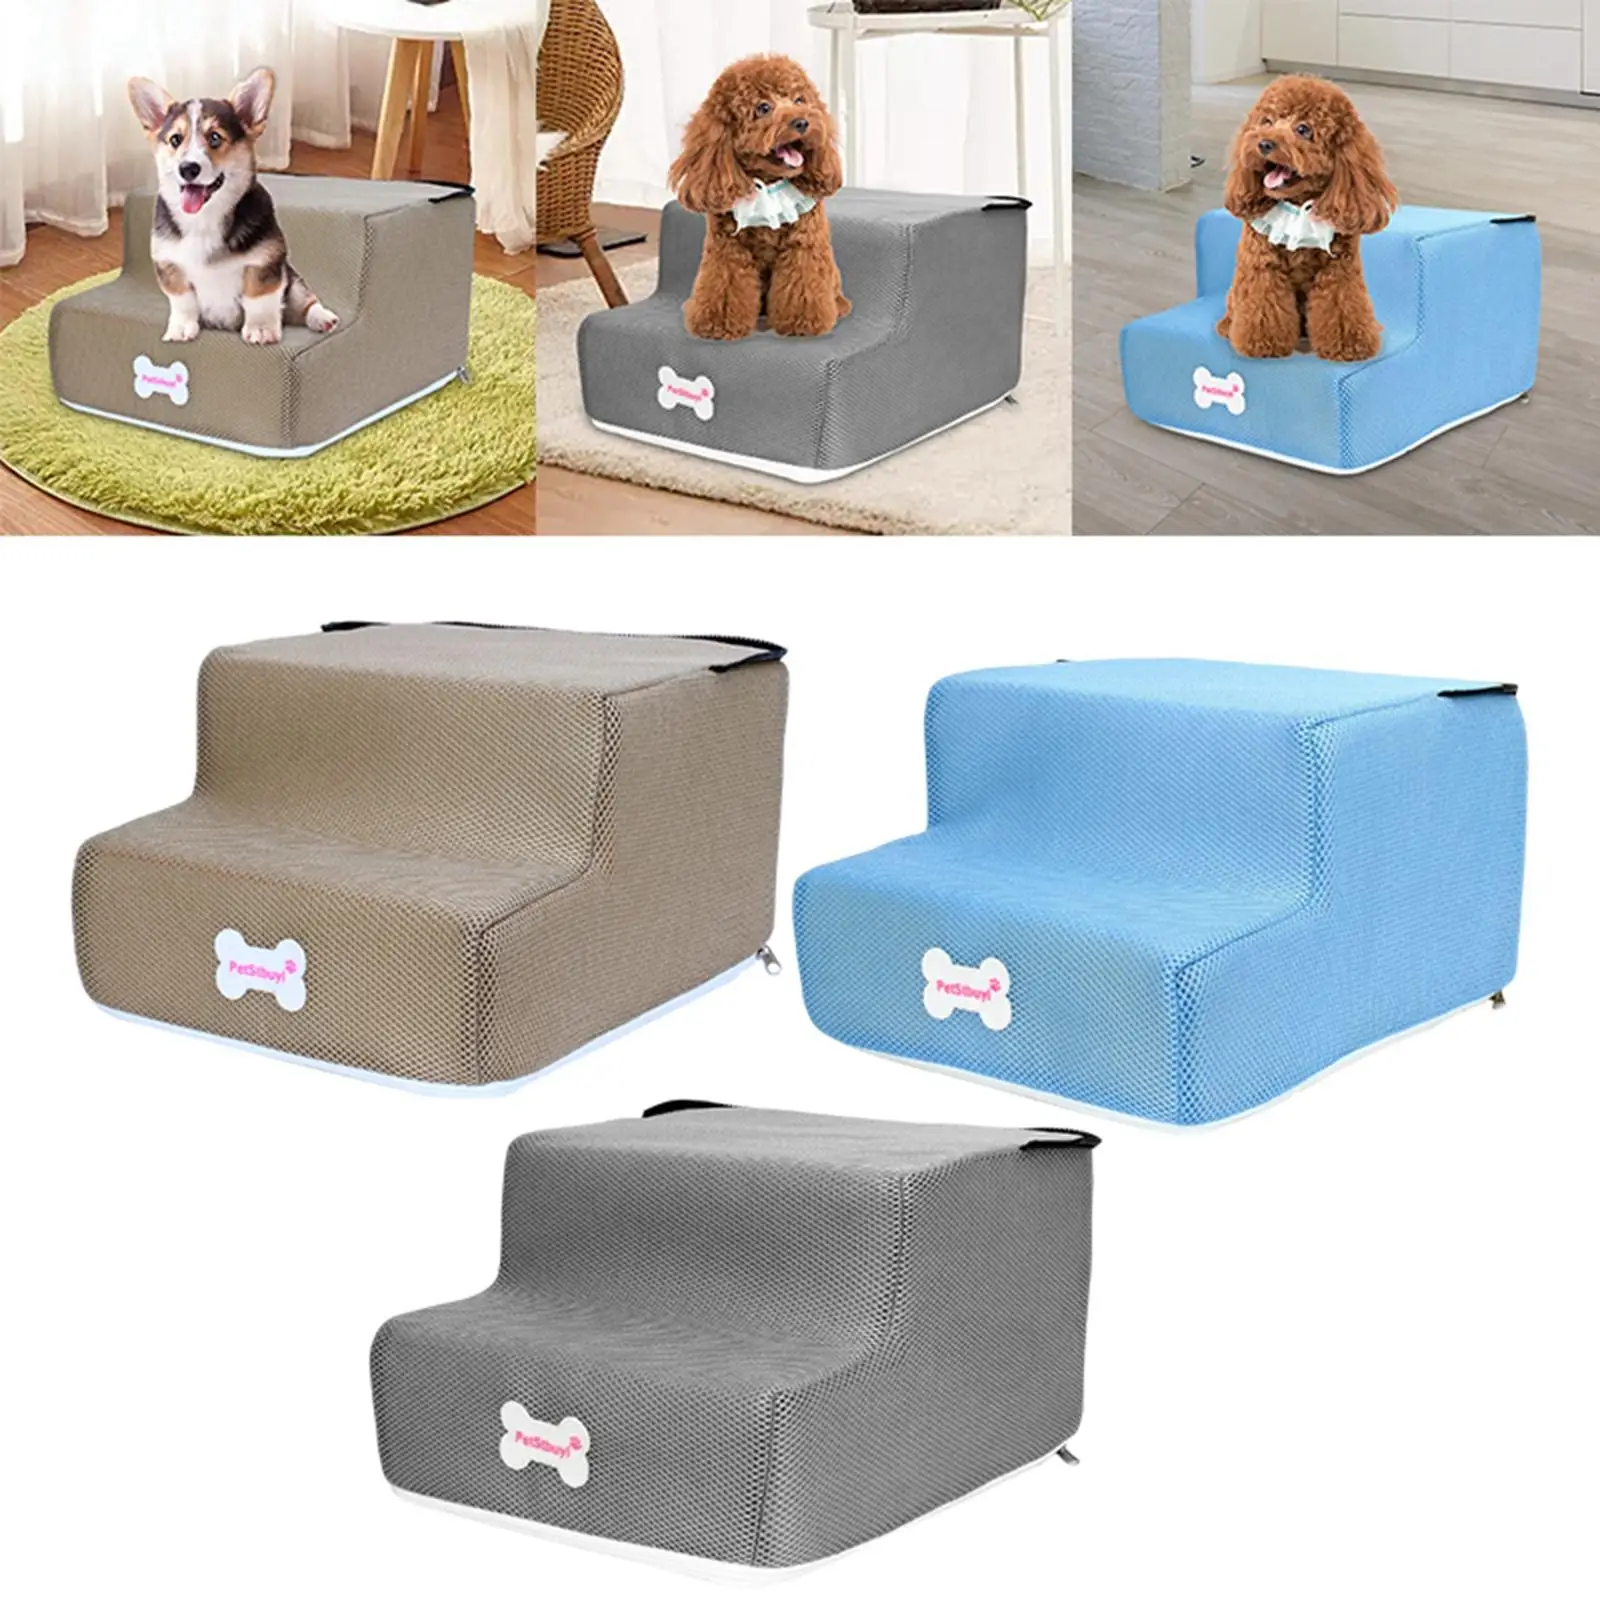 Breathable Pet Stair Steps W/ Washable Cover Mesh Stairs Pet Dog Dog Steps High Density Sponge Ramp Stairs for High Bed Cats